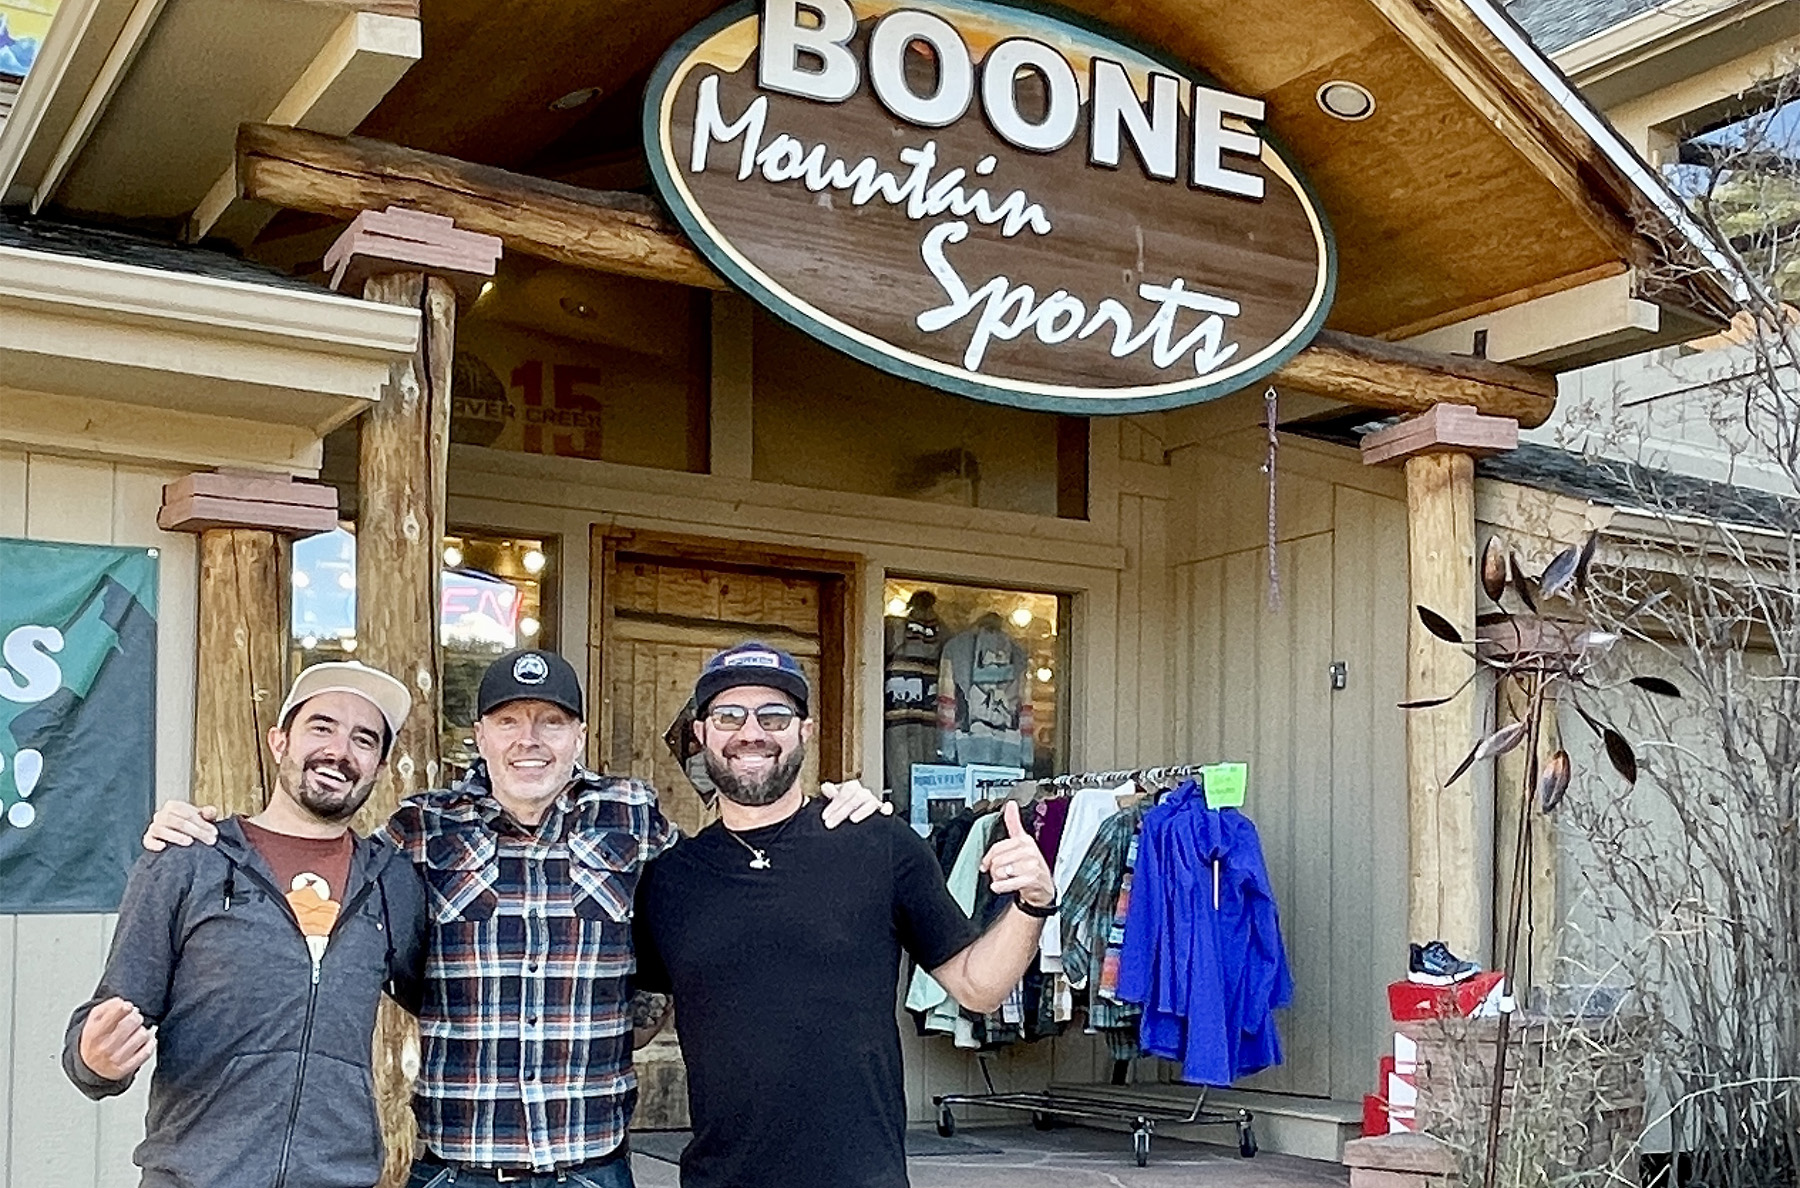 What are some of the biggest mistakes skiers make when buying gear? And what do regular, recreational skiers & snowboarders (who aren’t racing against the clock) need to know about ski tuning and waxing? On GEAR:30, Jonathan discusses these questions and more with Logan and Riley Boone of Boone Mountain Sports. They also talk about how they all met (it was in Austria), and Jonathan announces our upcoming ‘Blister 90-Flex Challenge’.